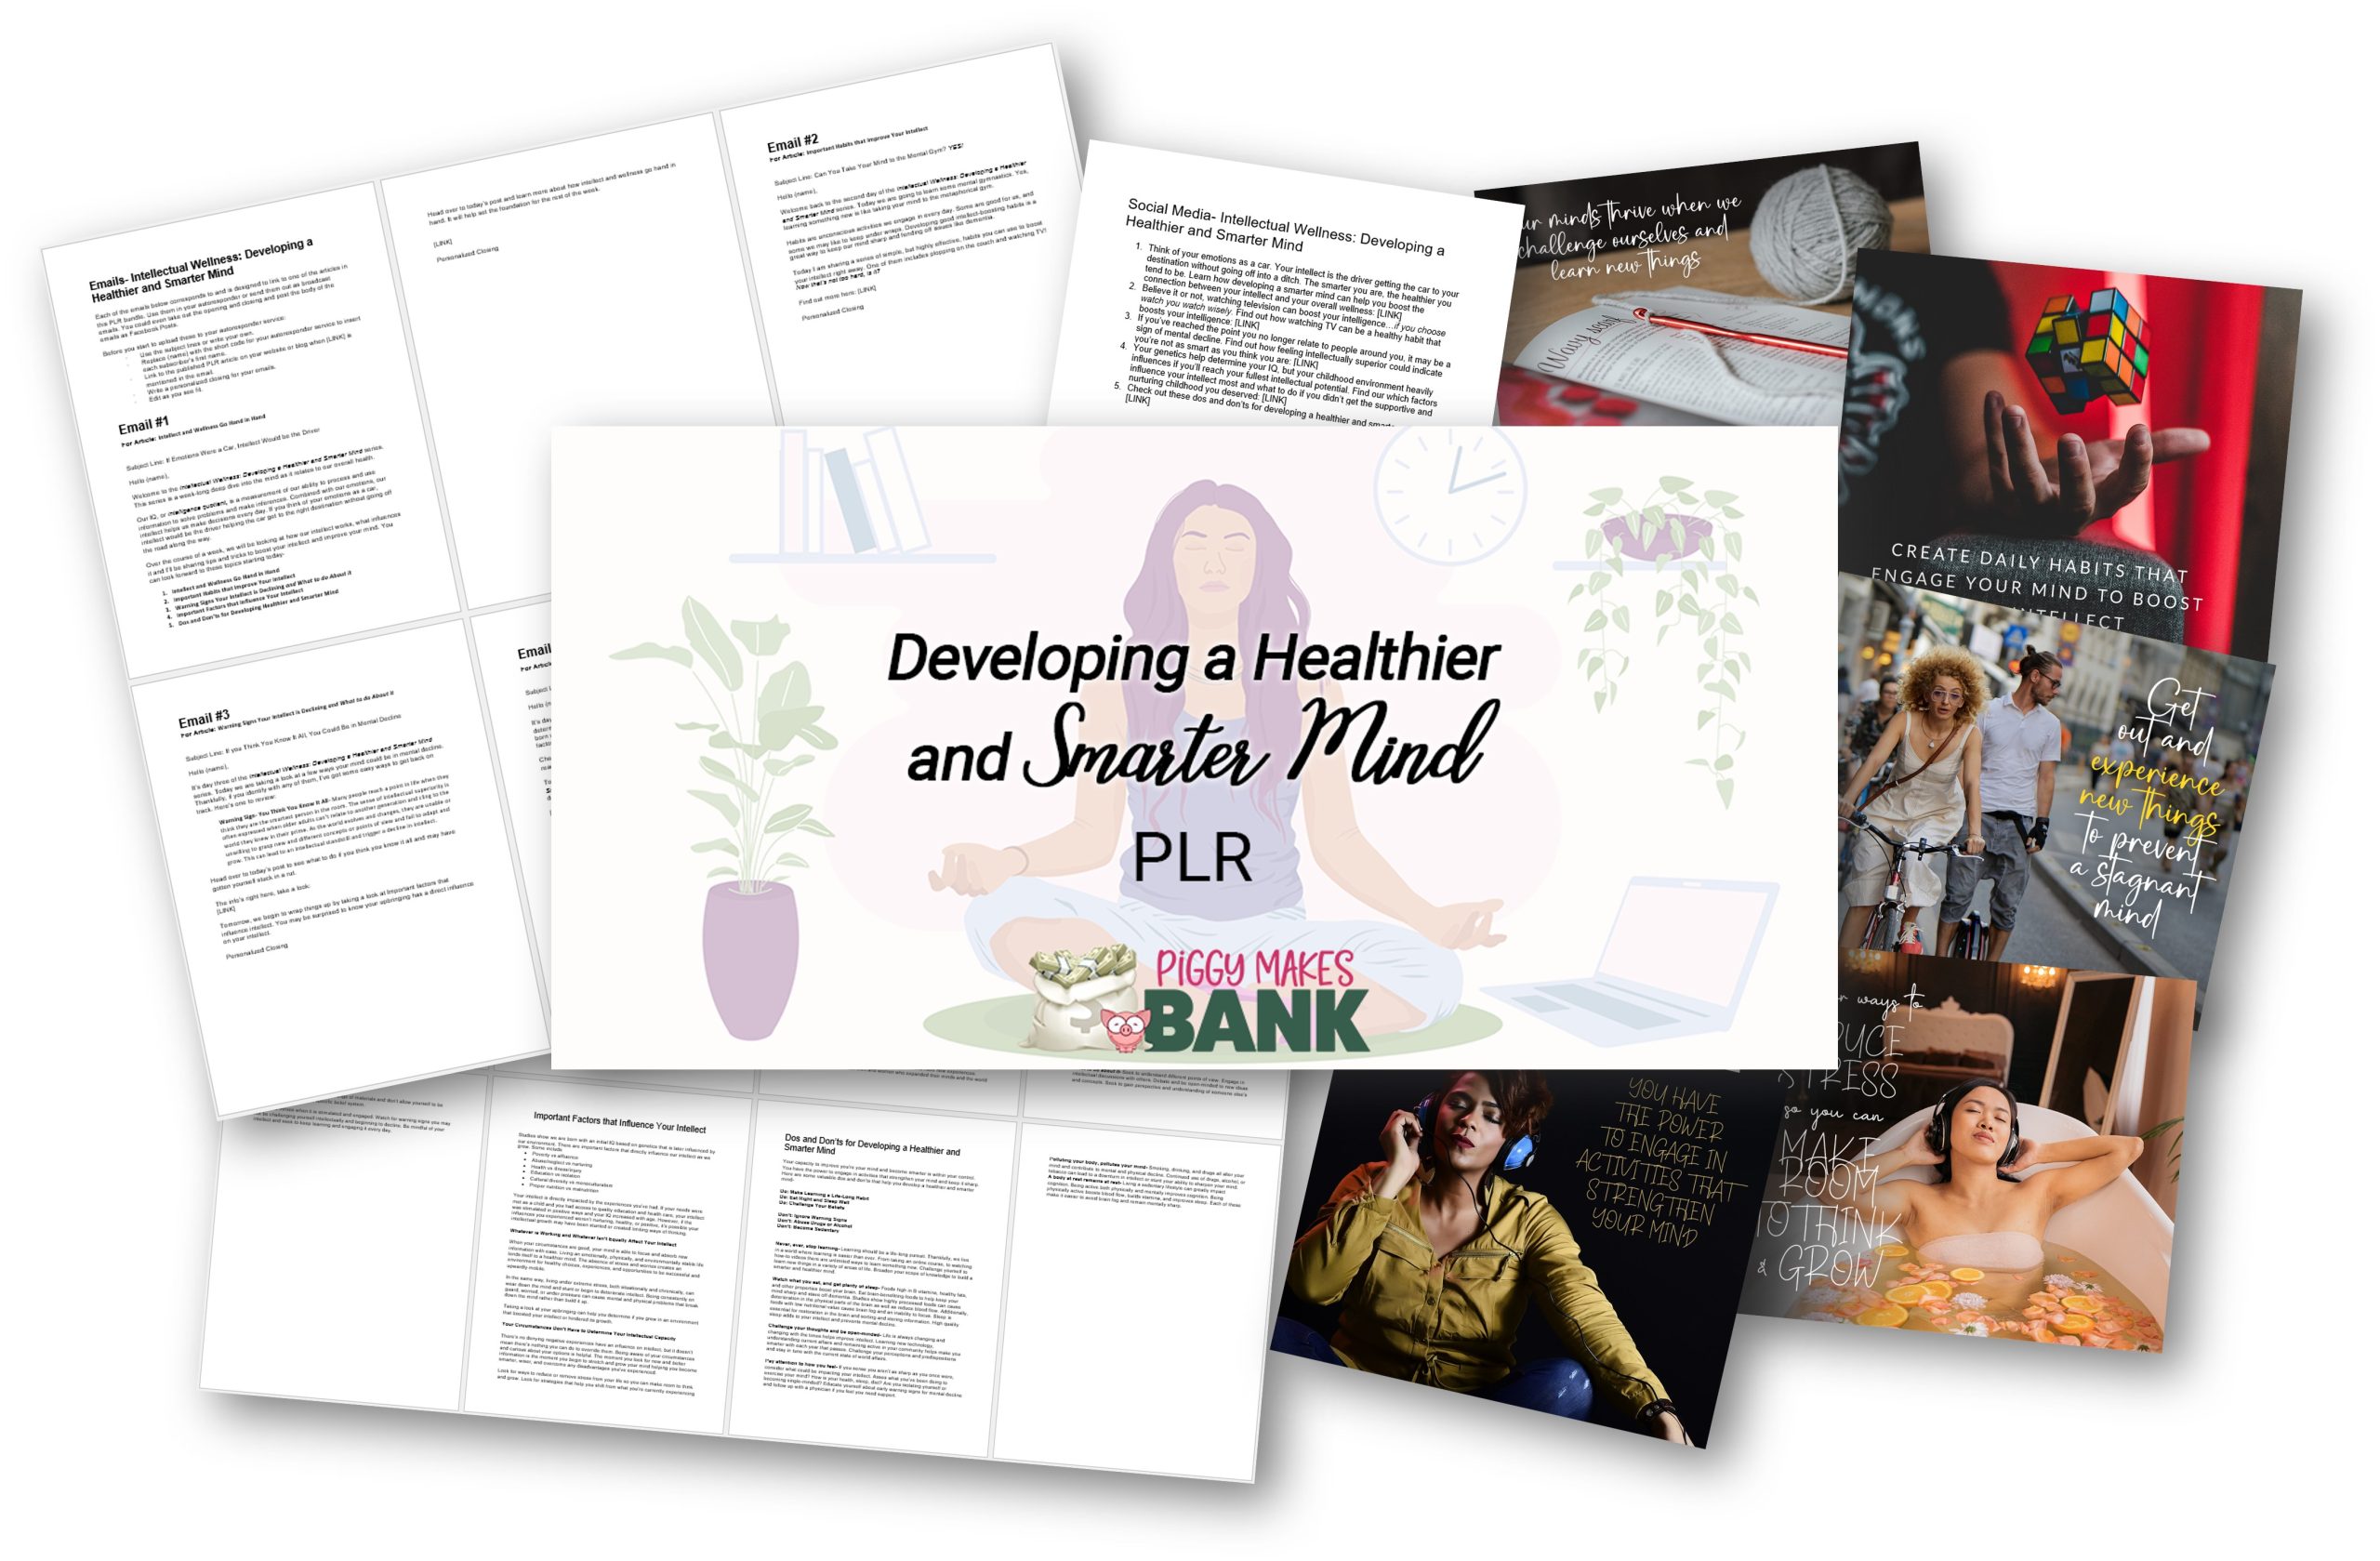 Developing a Healthier and Smarter Mind PLR